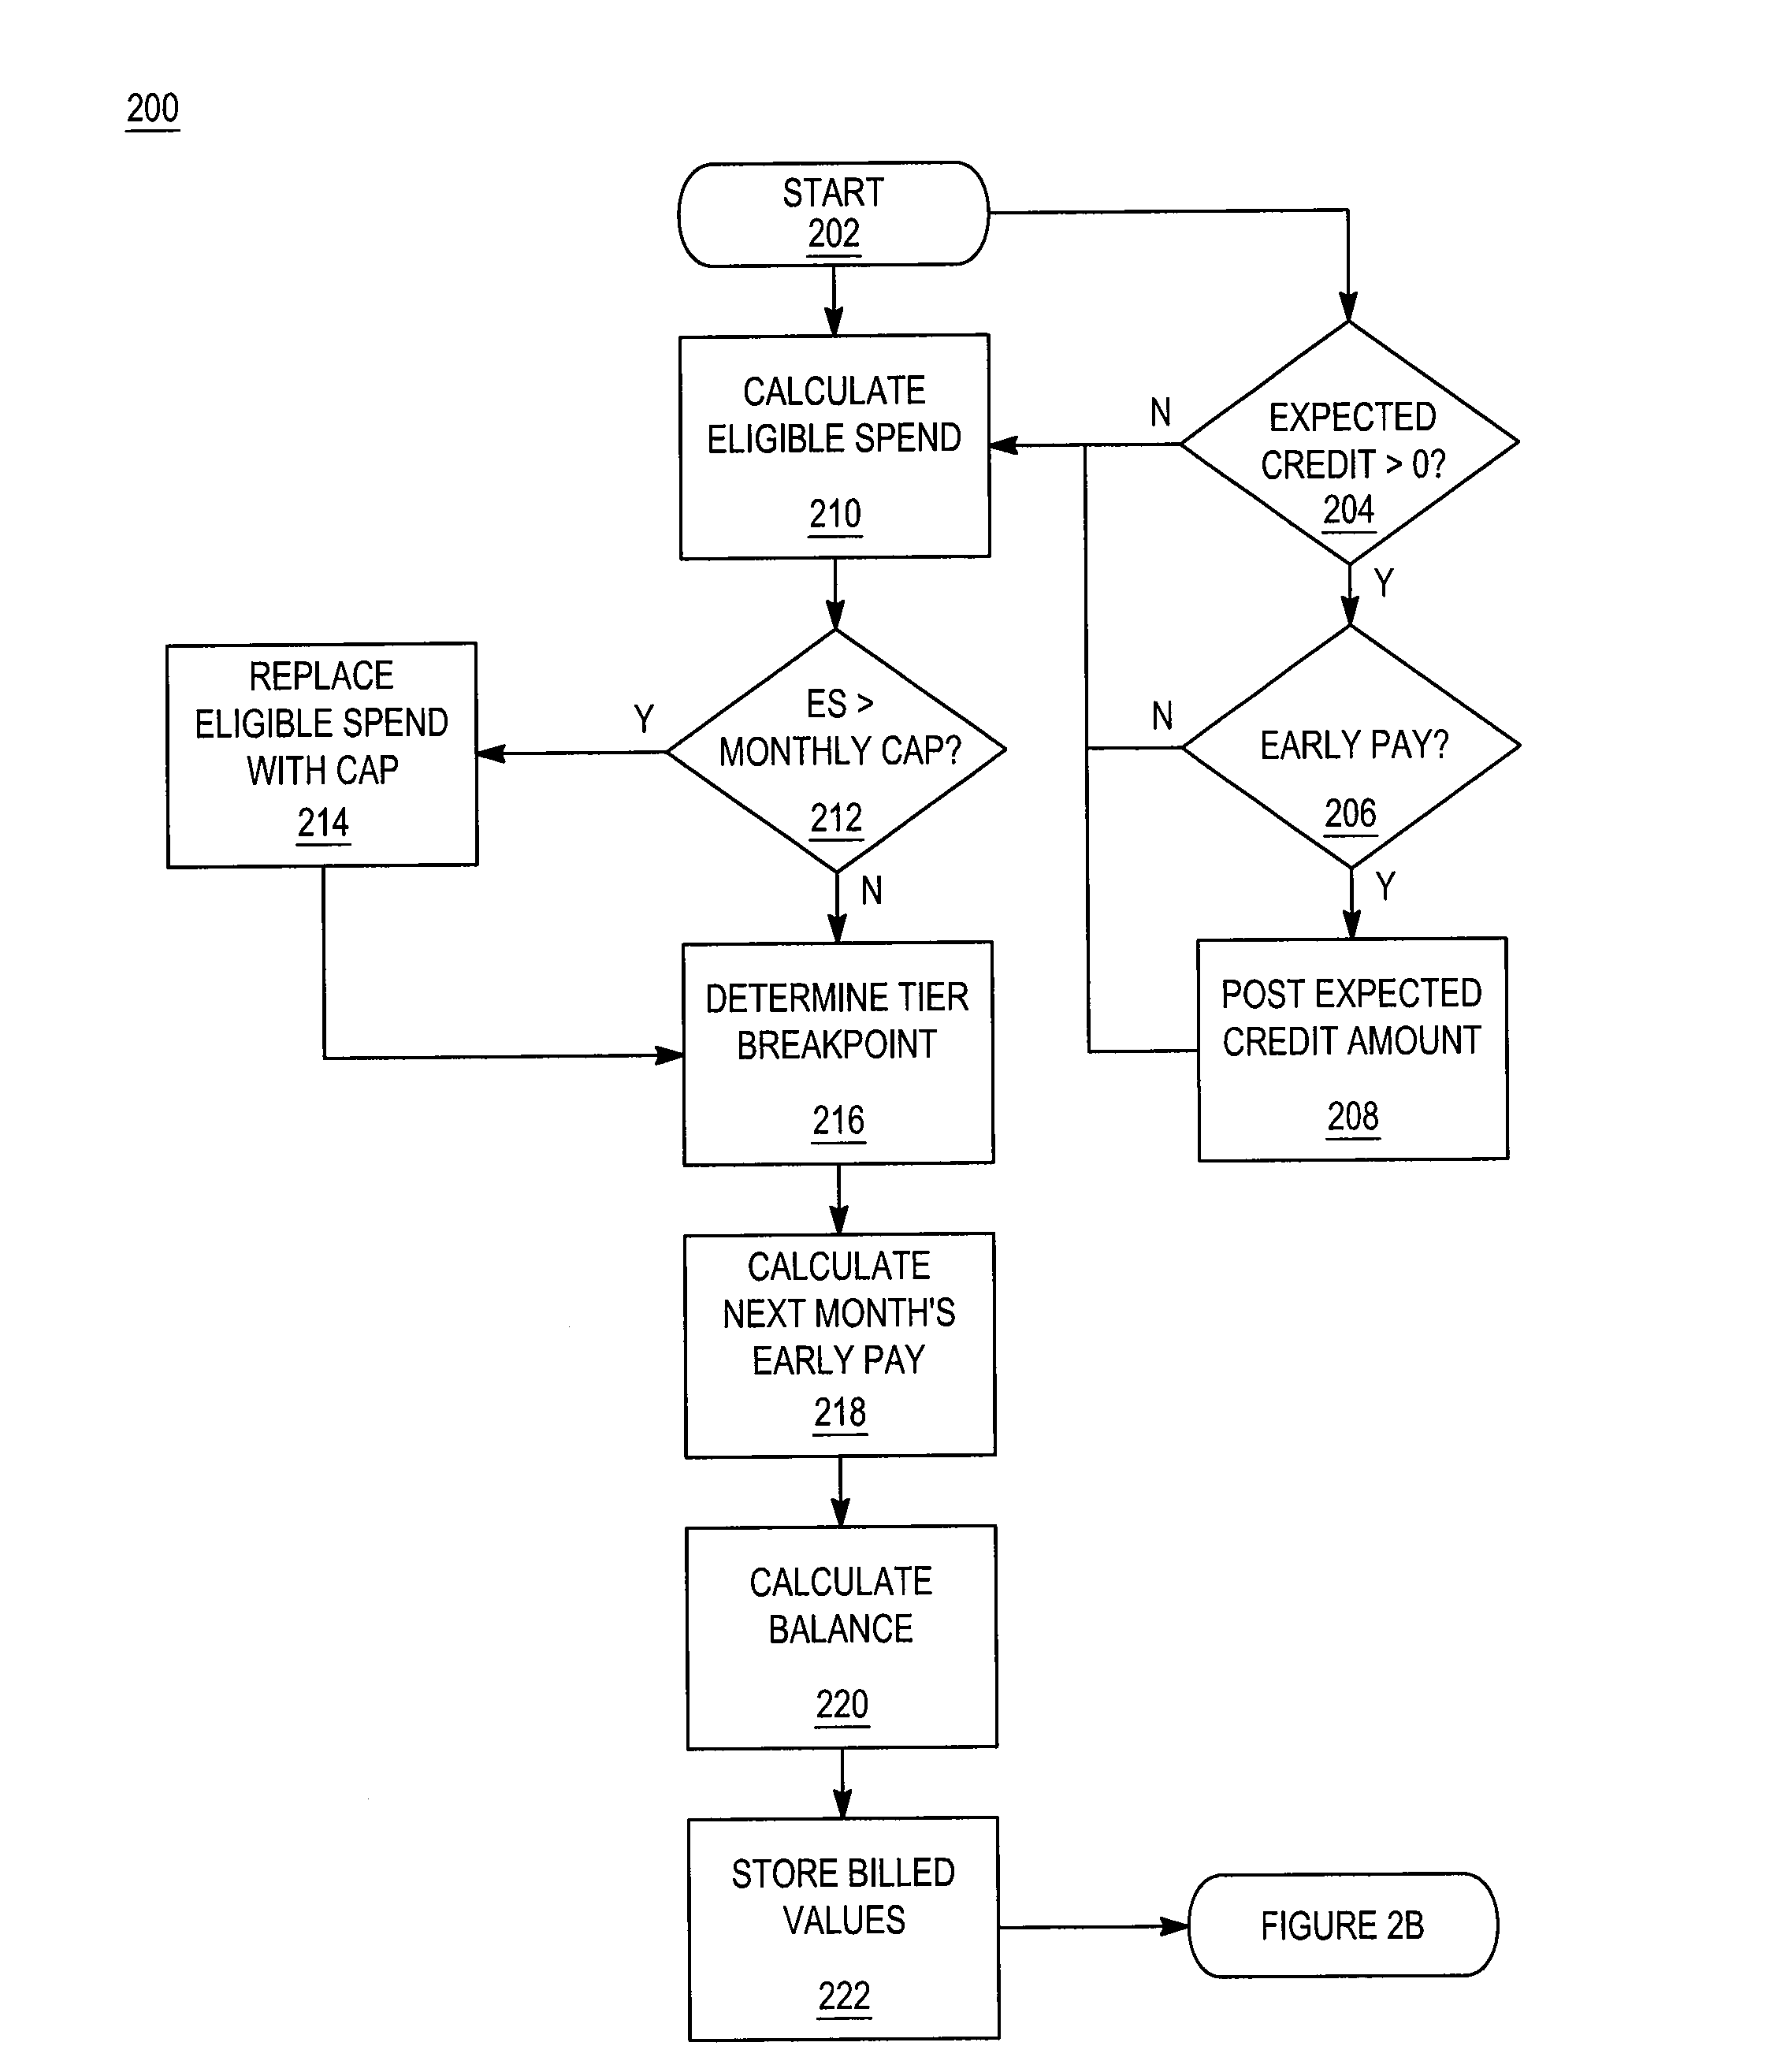 System and method for evaluating positive behavior and offering incentives based upon limited use identifier transactions